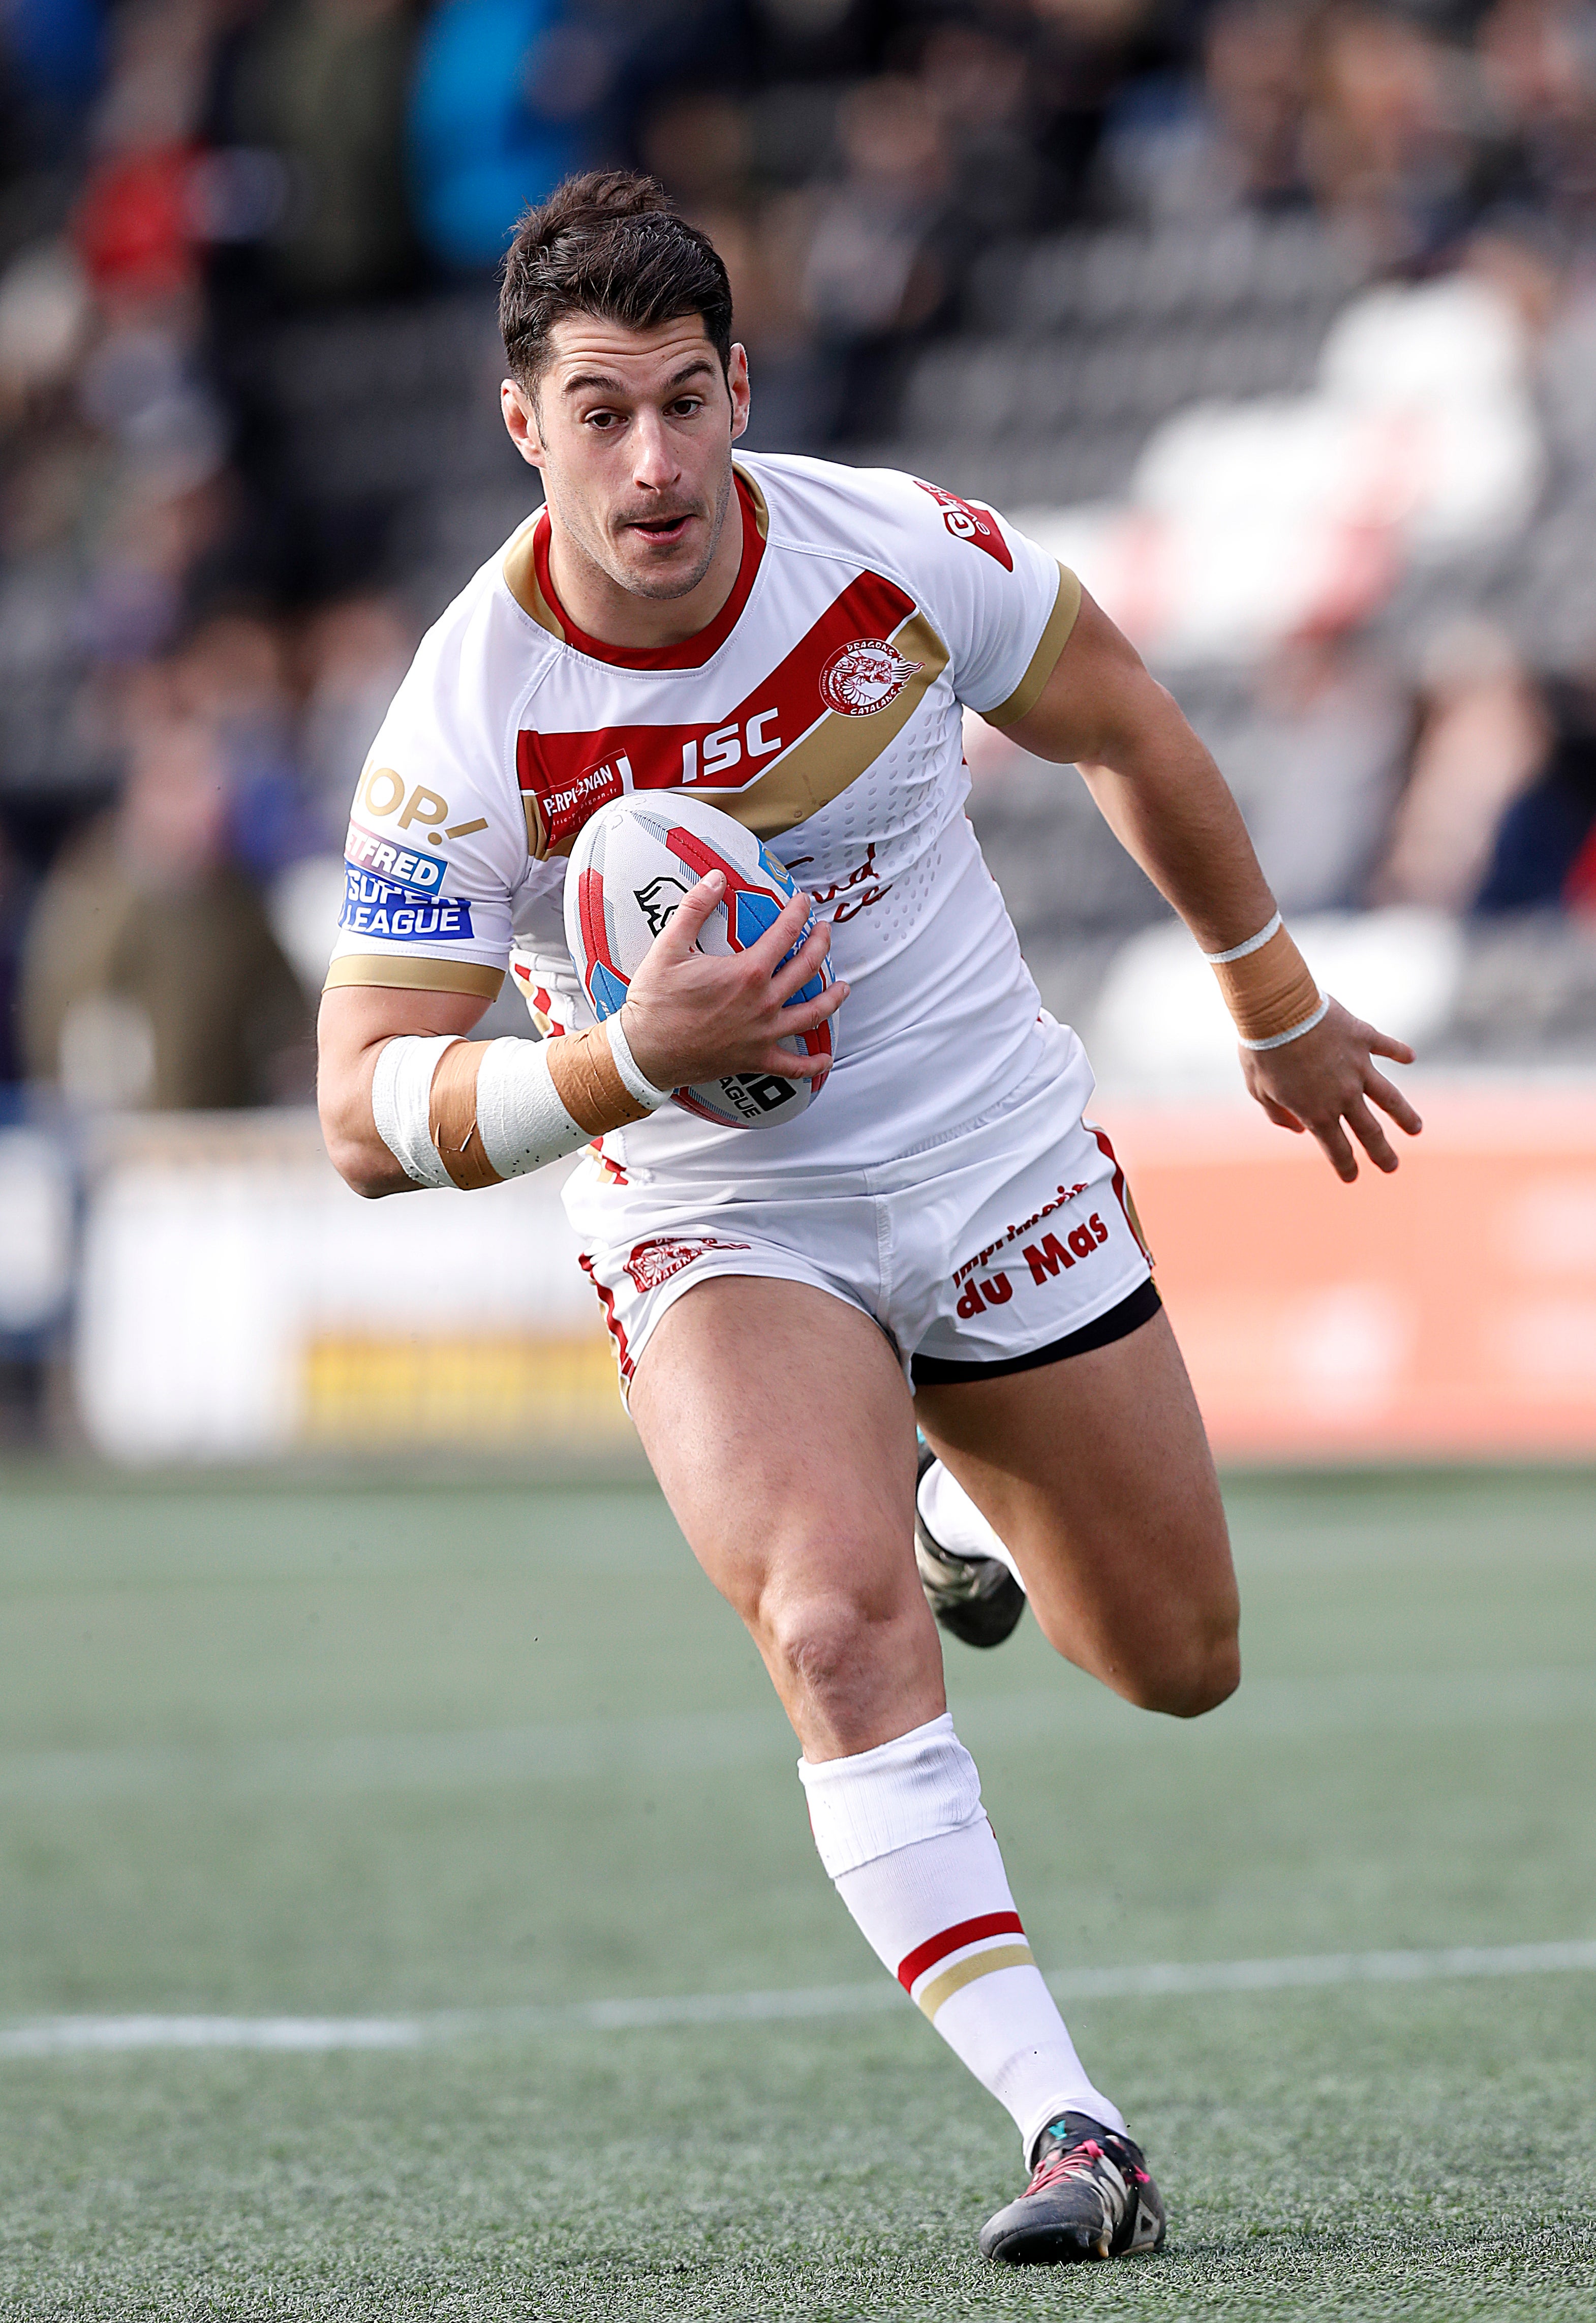 Catalans Dragons captain Ben Garcia scored the first try and will lead his side out at Old Trafford (Martin Rickett/PA)